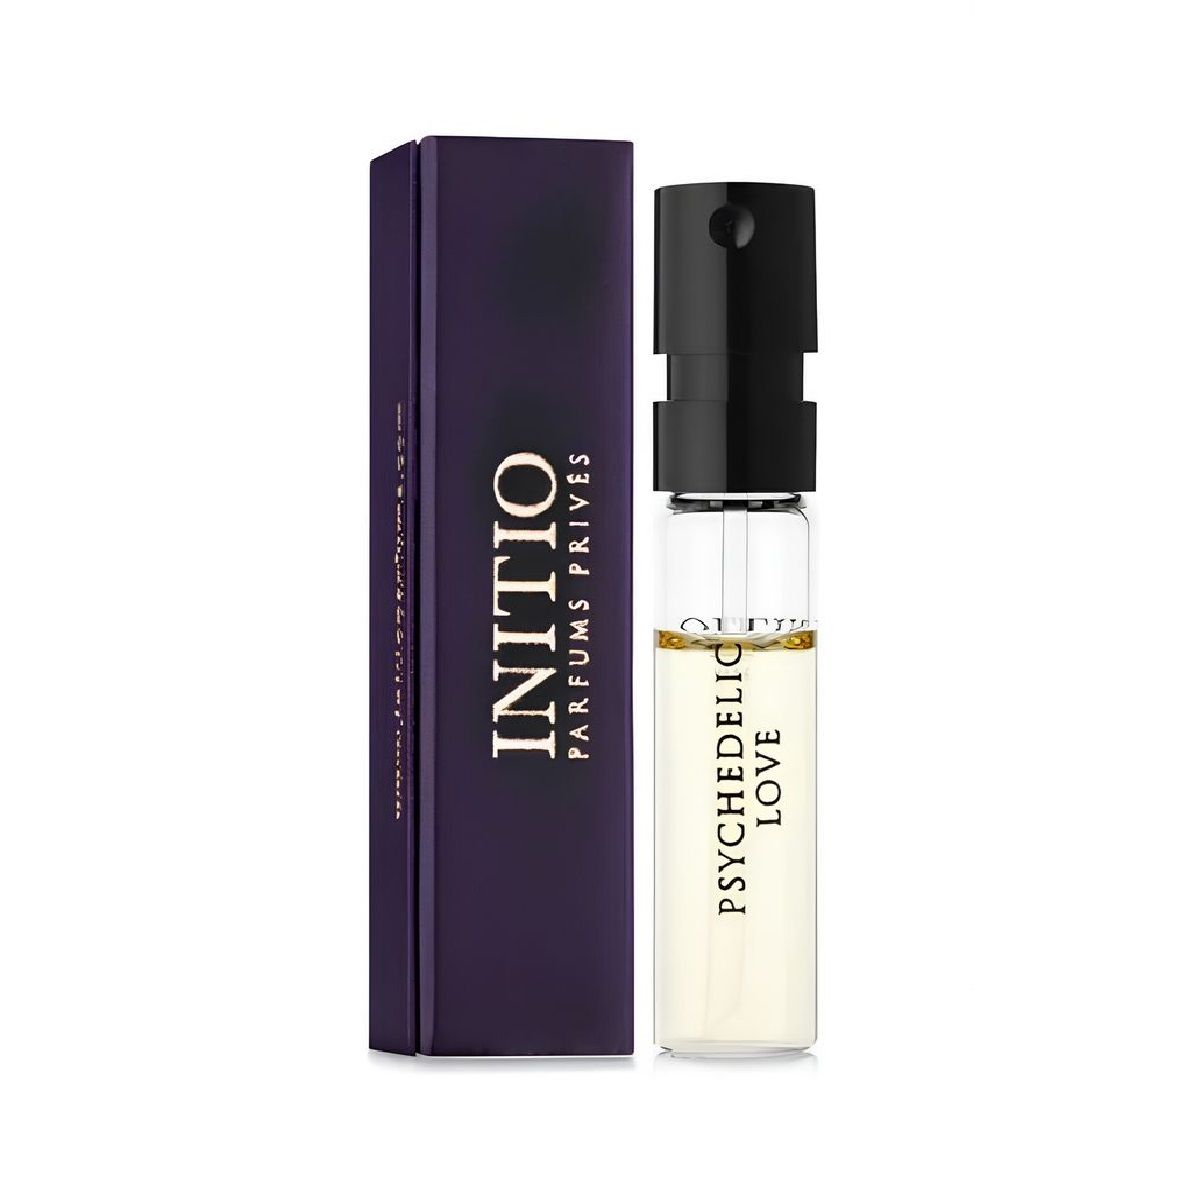 Initio prives psychedelic. Psychedelic Love Initio Parfums prives. Initio Parfums prives Psychedelic Love EDP 1.5ml пробник. Initio Psychedelic Love пробники. Initio Parfums prives Psychedelic Love u EDP.